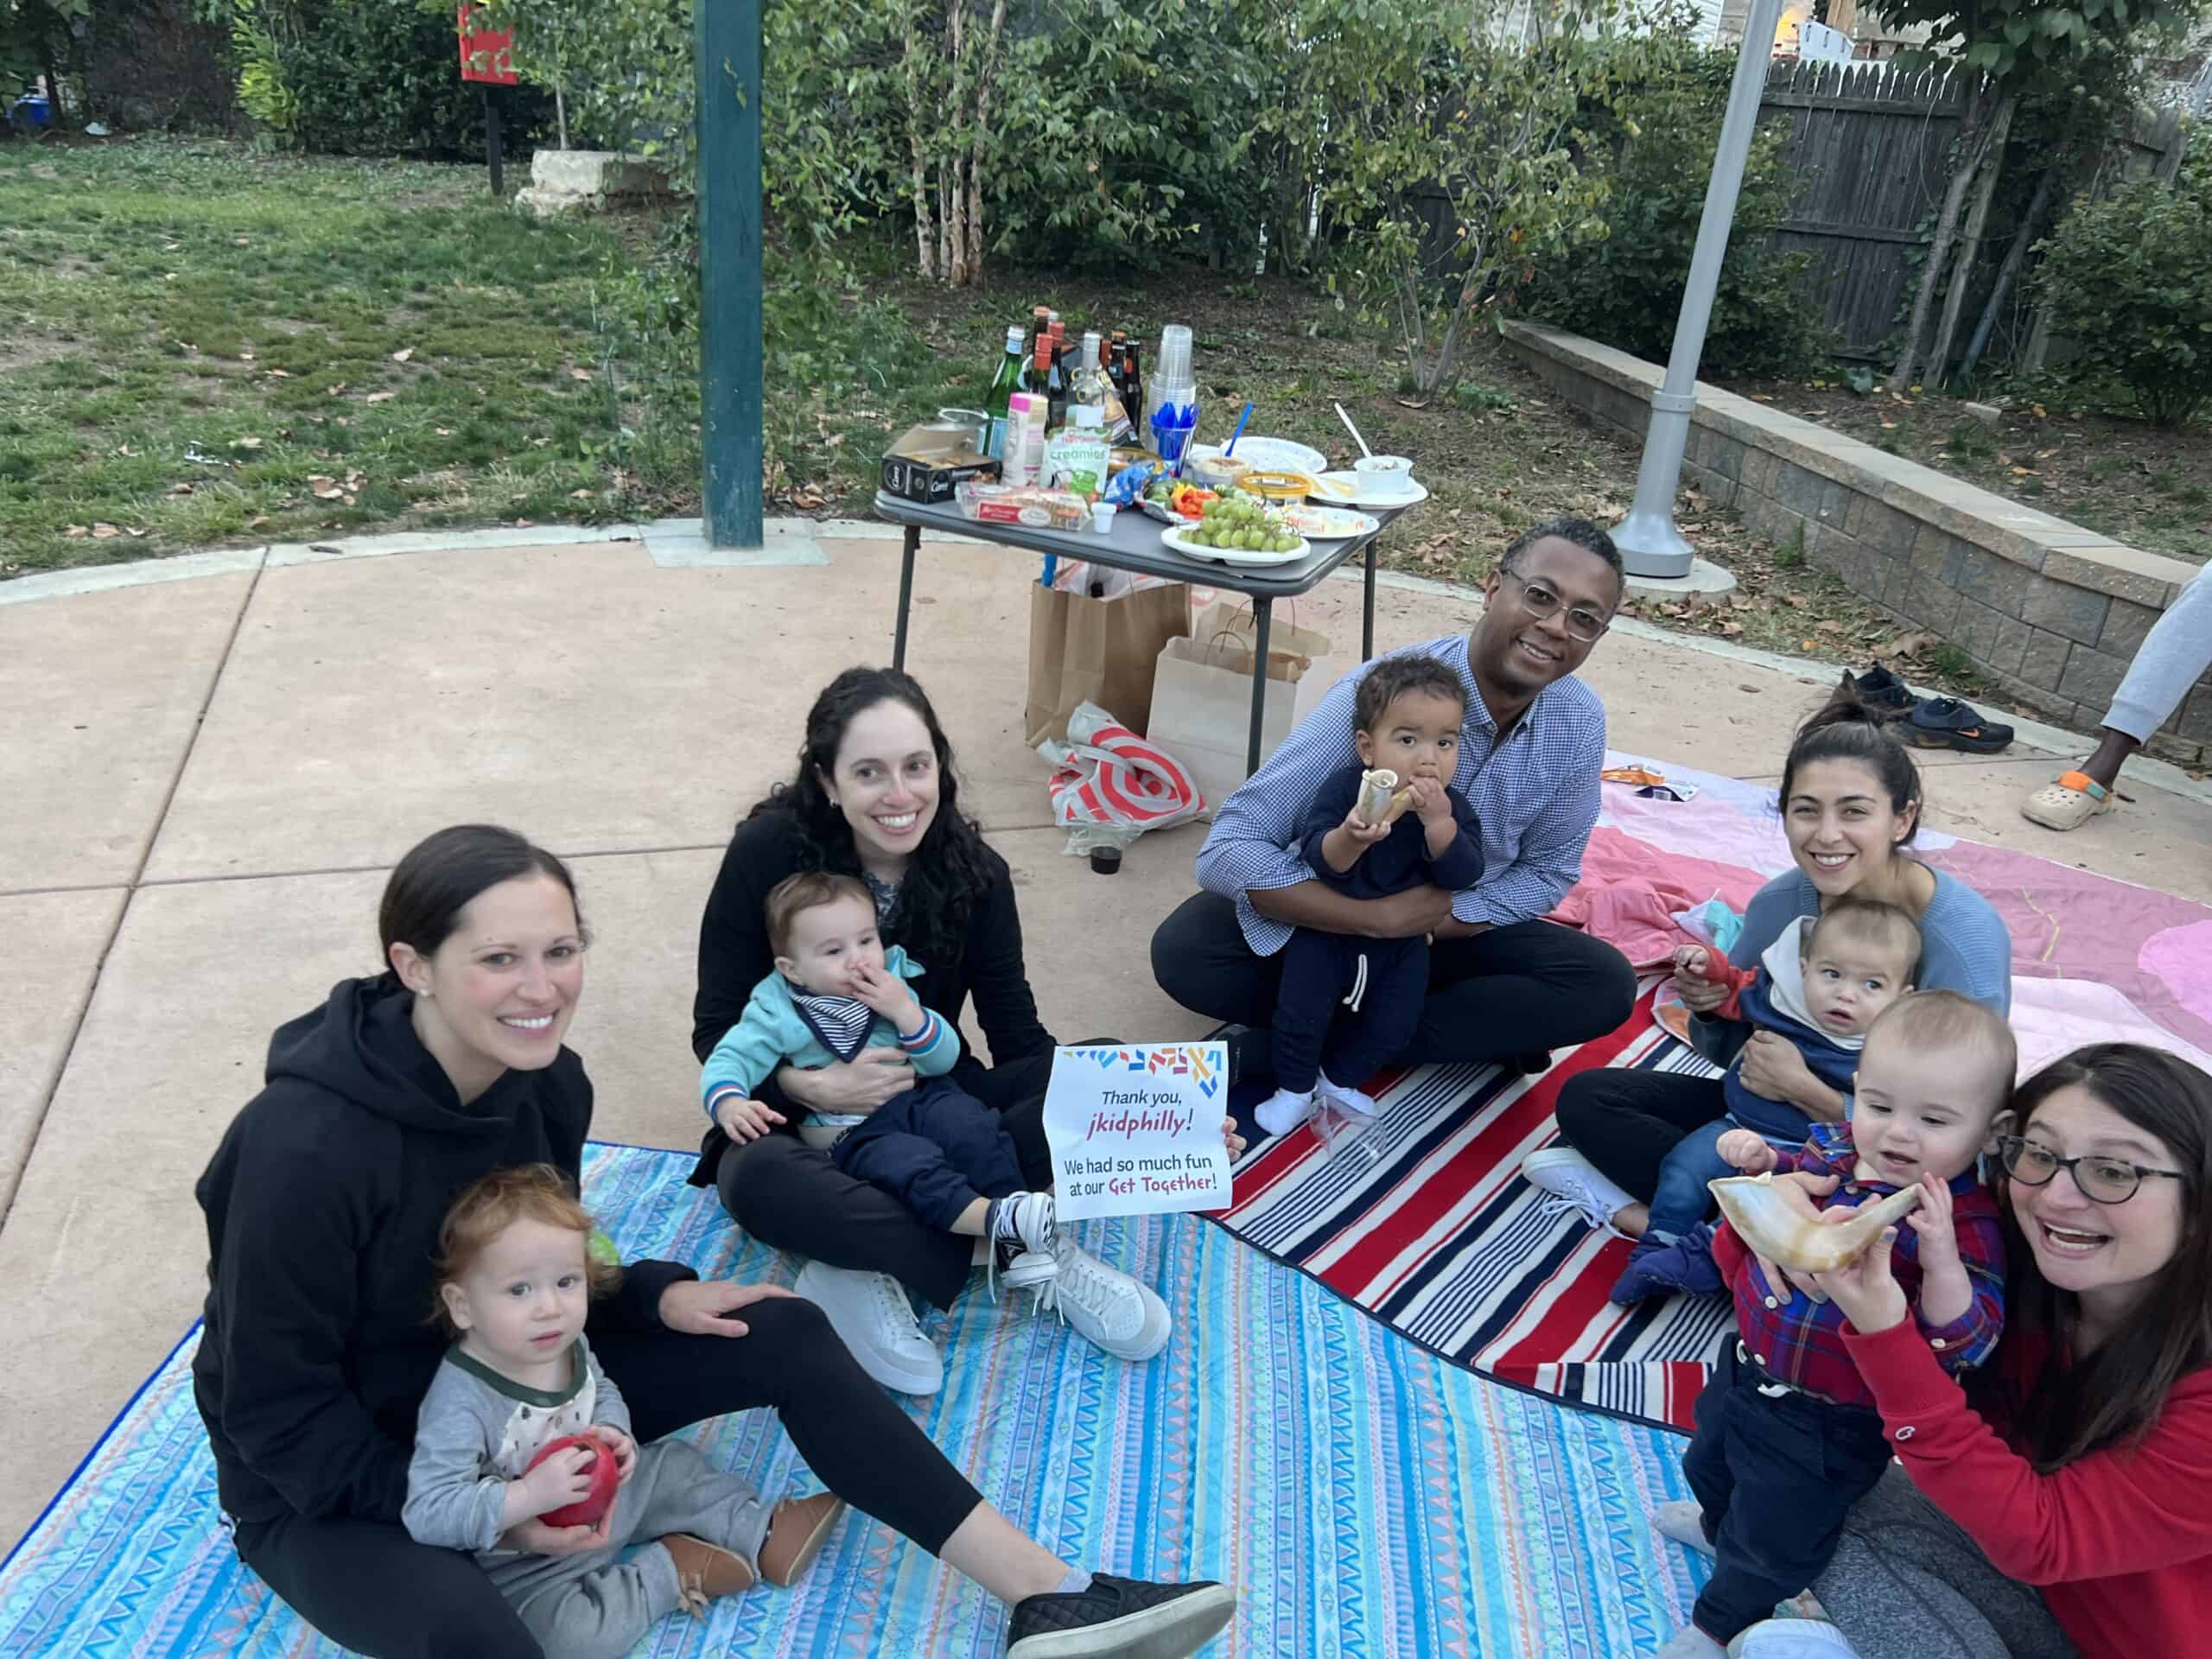 A phot of several adults, each with a baby in their lap, sitting on picnic blankets holding a sign that says thank you jkidphilly we had so much fun at our get together